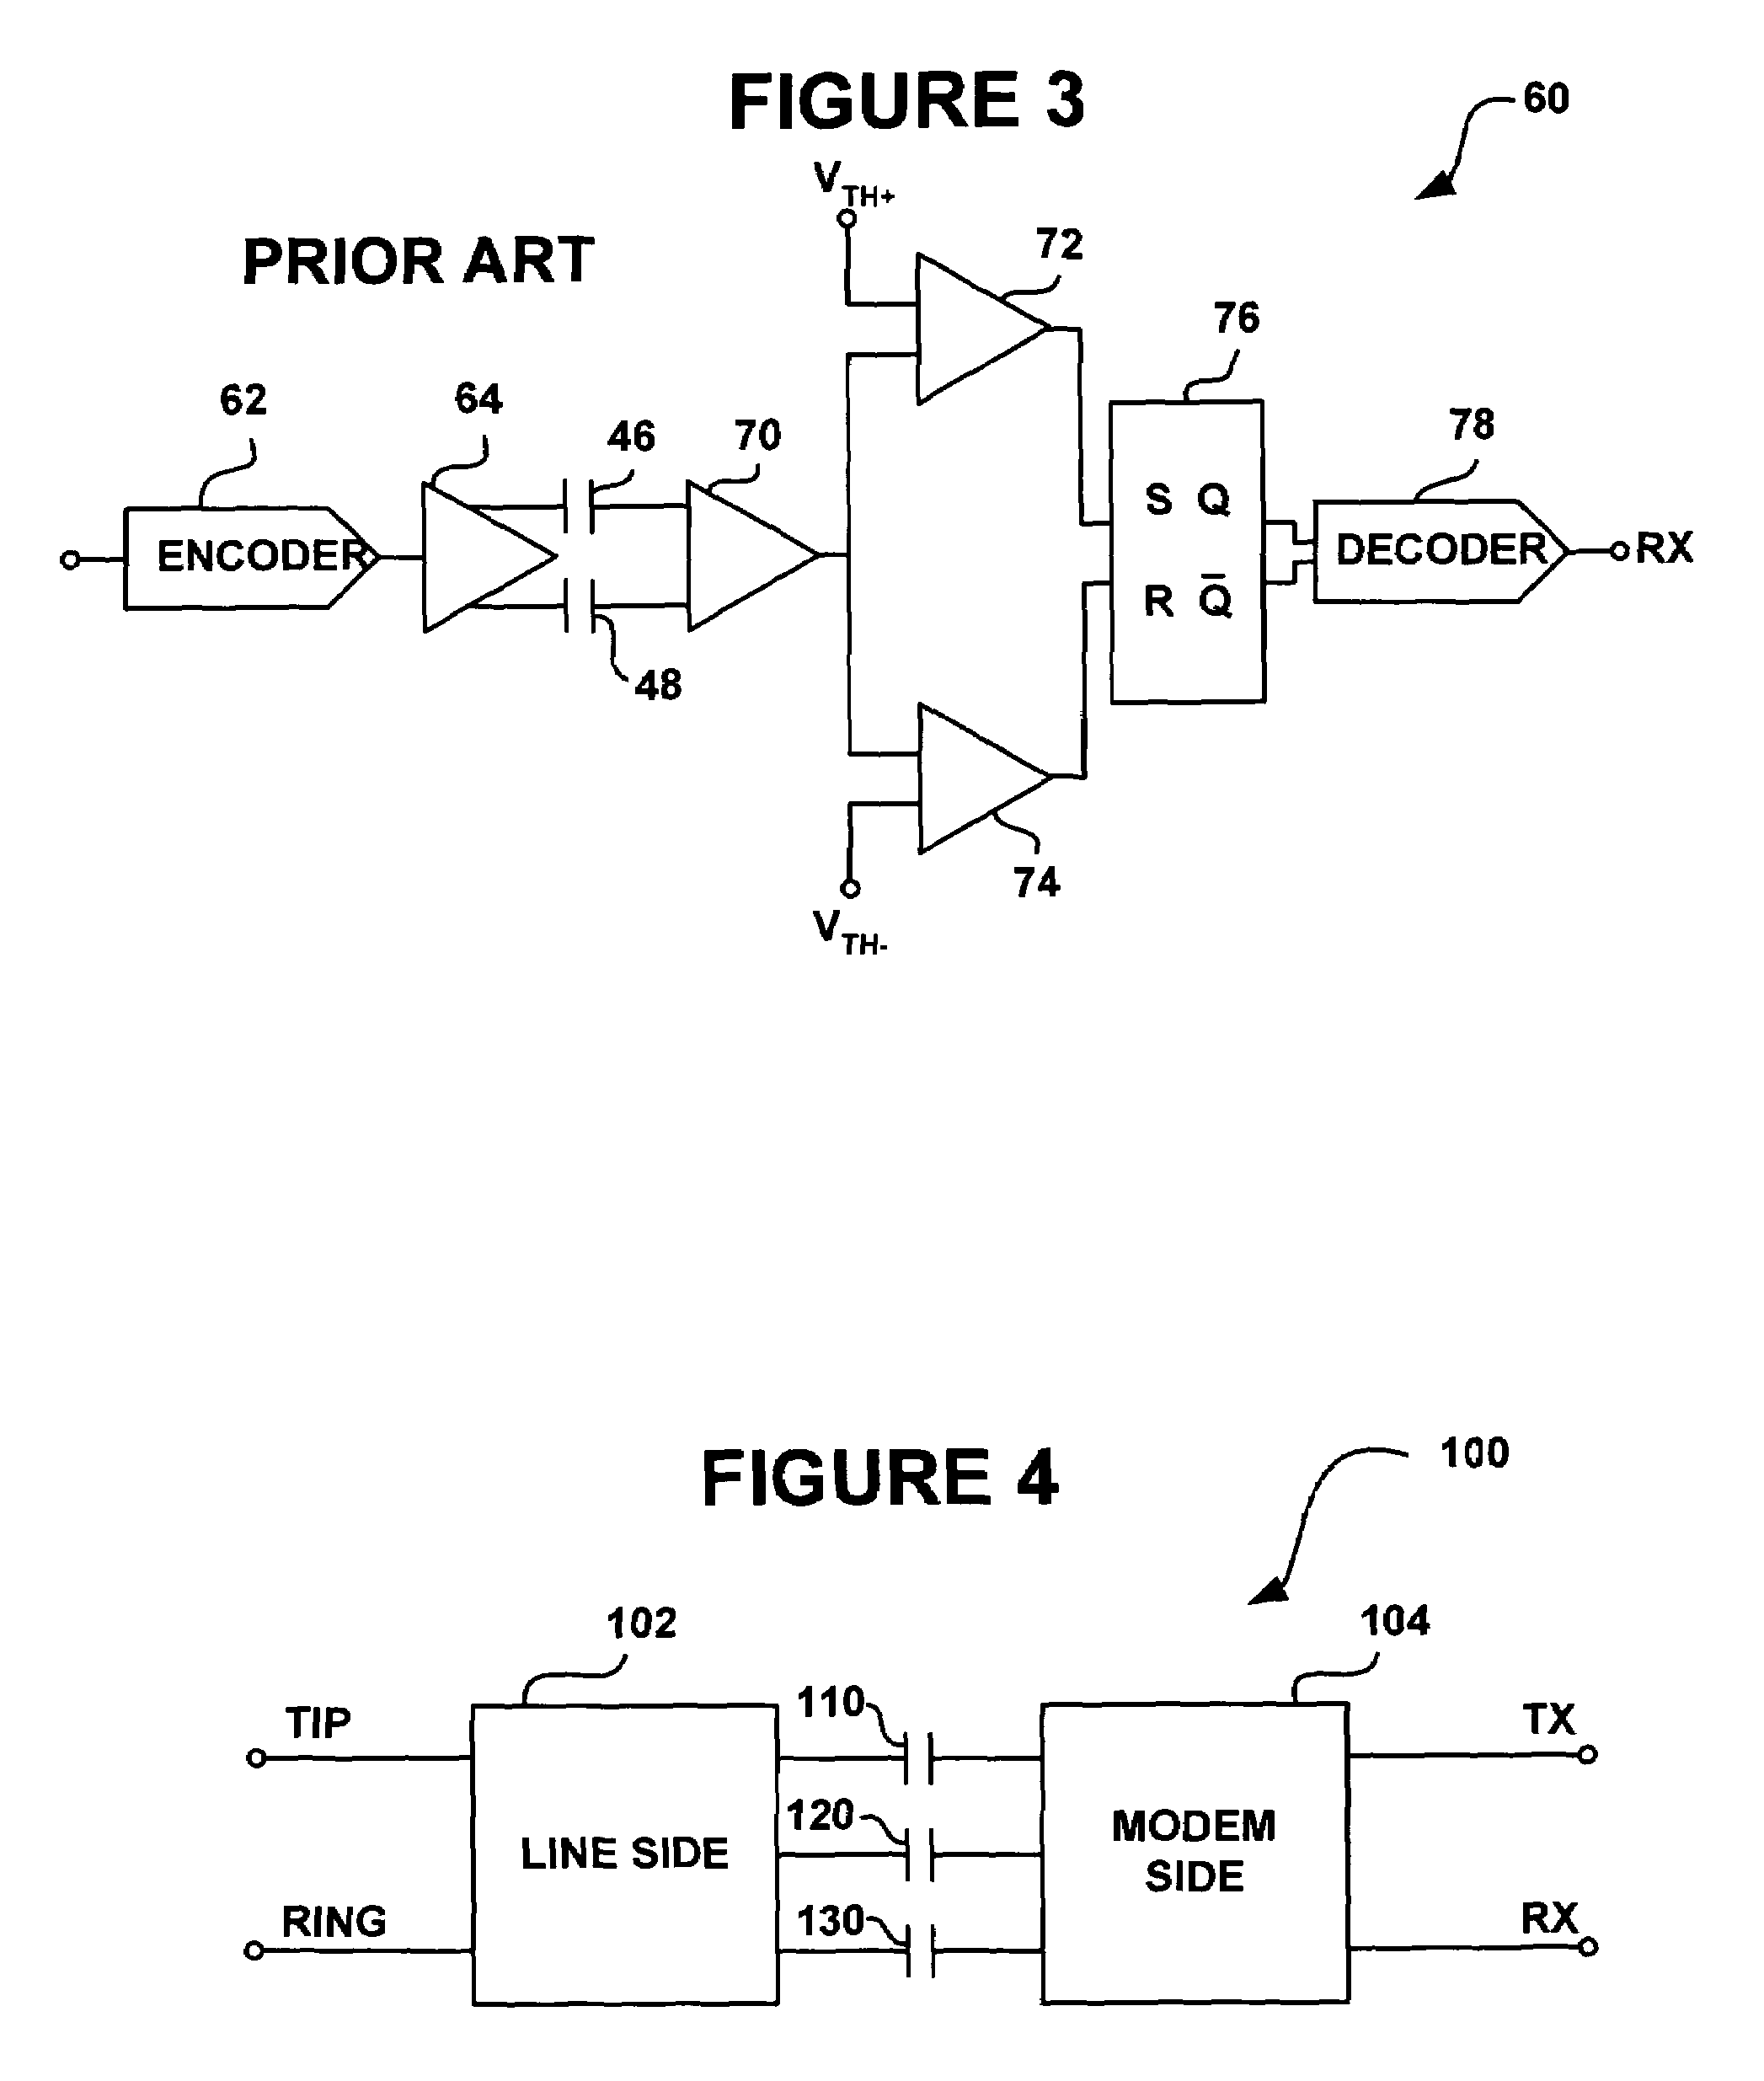 Method and apparatus for isolation in a data access arrangement using analog encoded pulse signaling